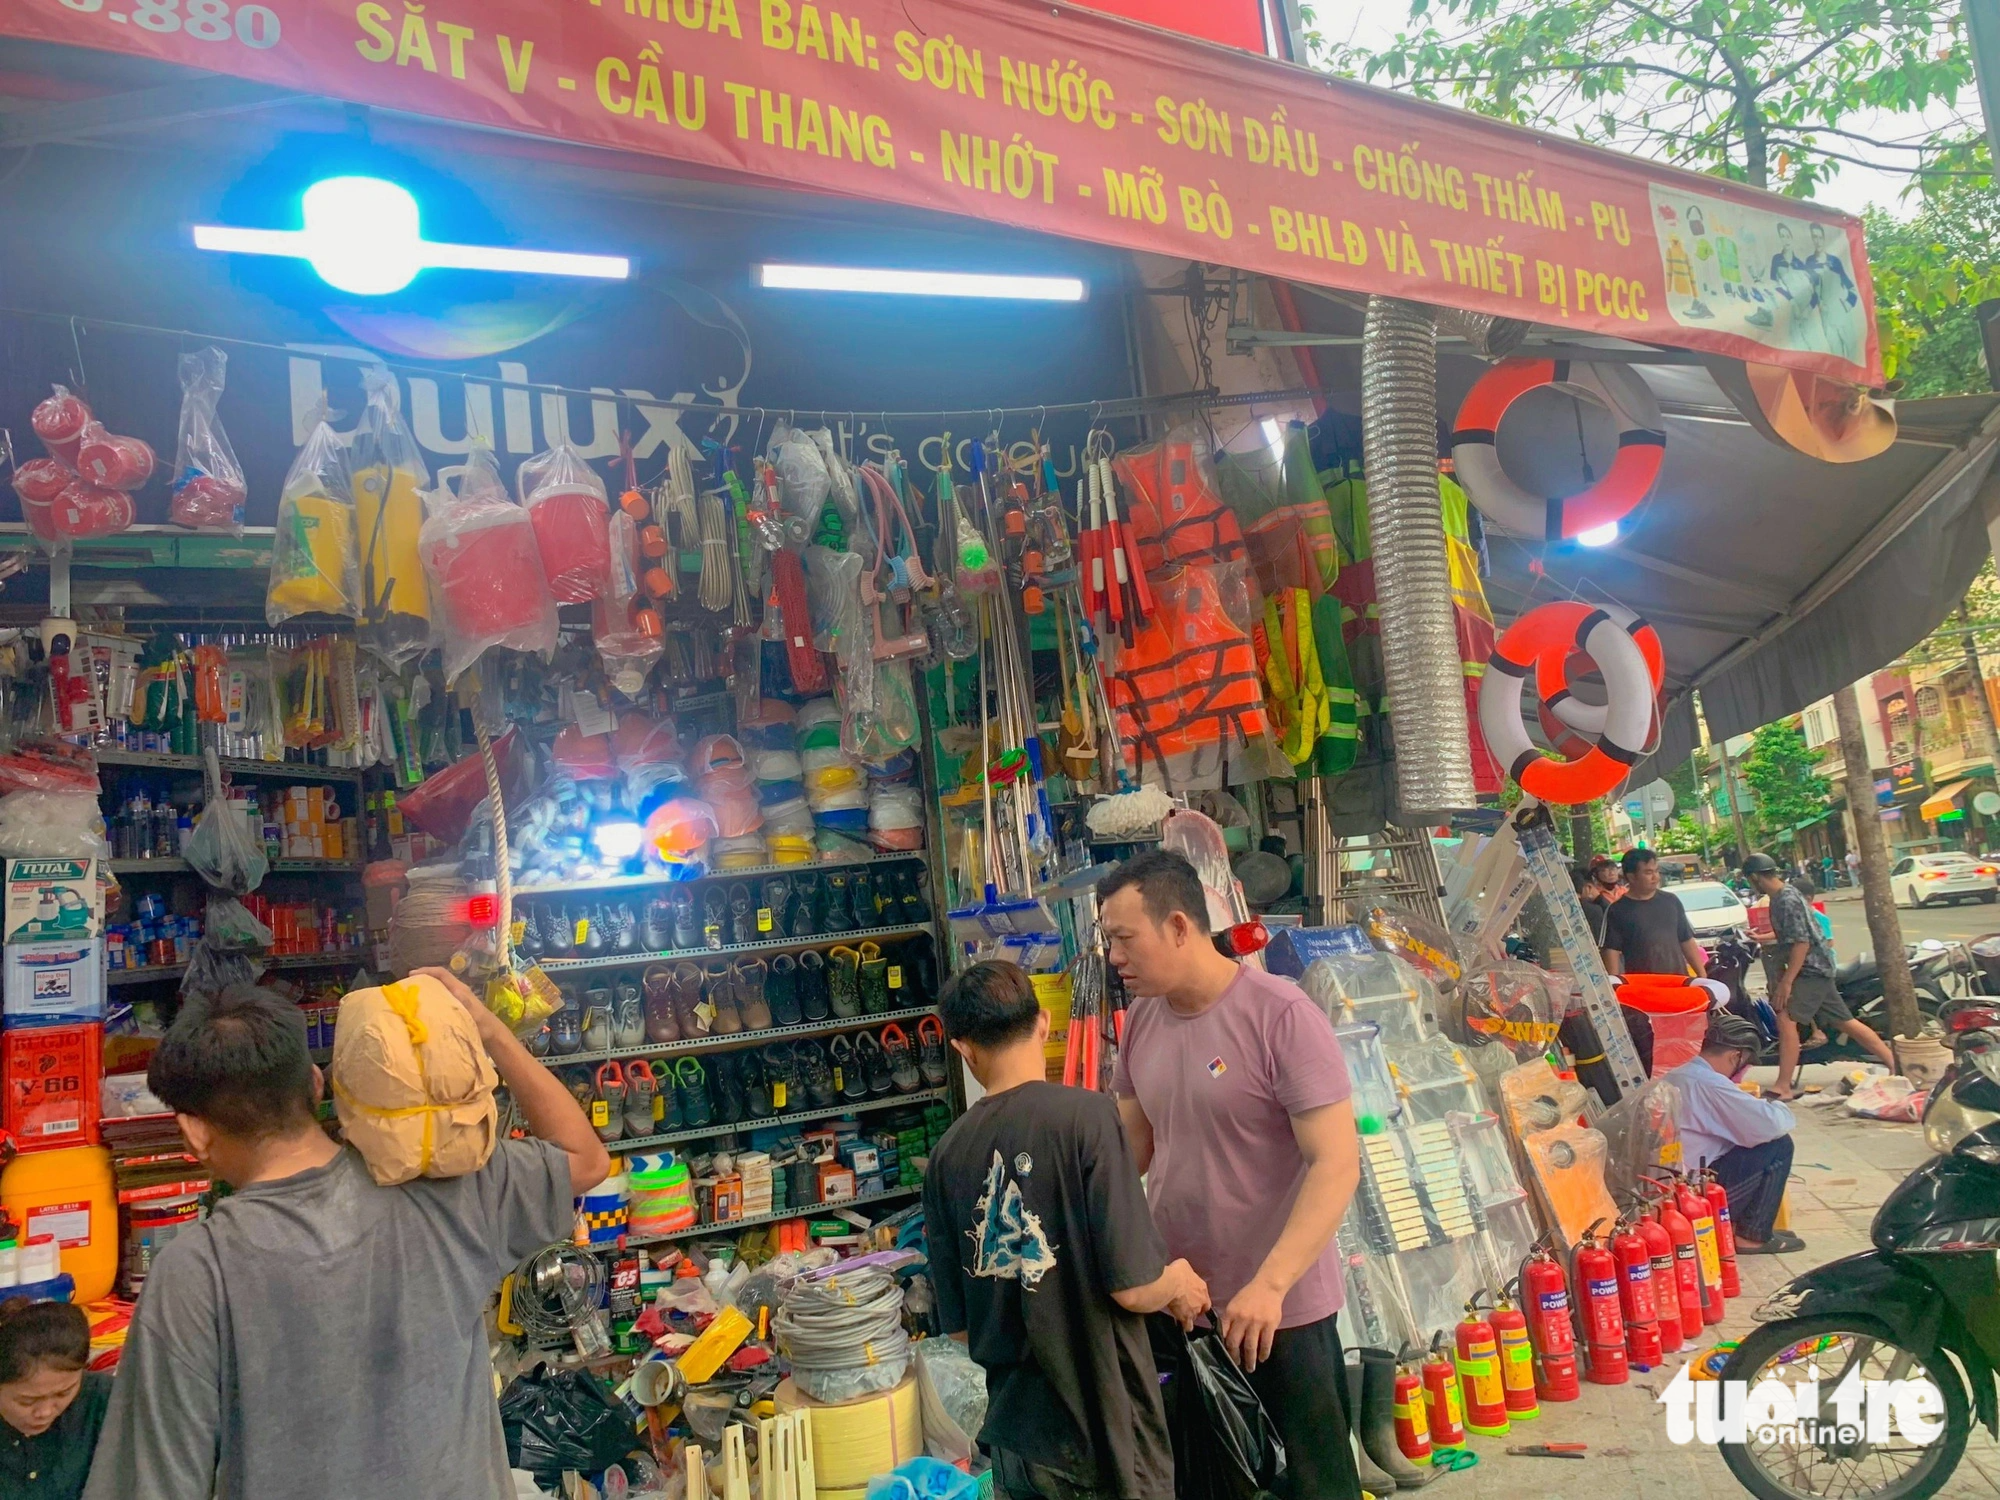 Fire safety equipment sells like hot cakes in Ho Chi Minh City after deadly fire in Hanoi